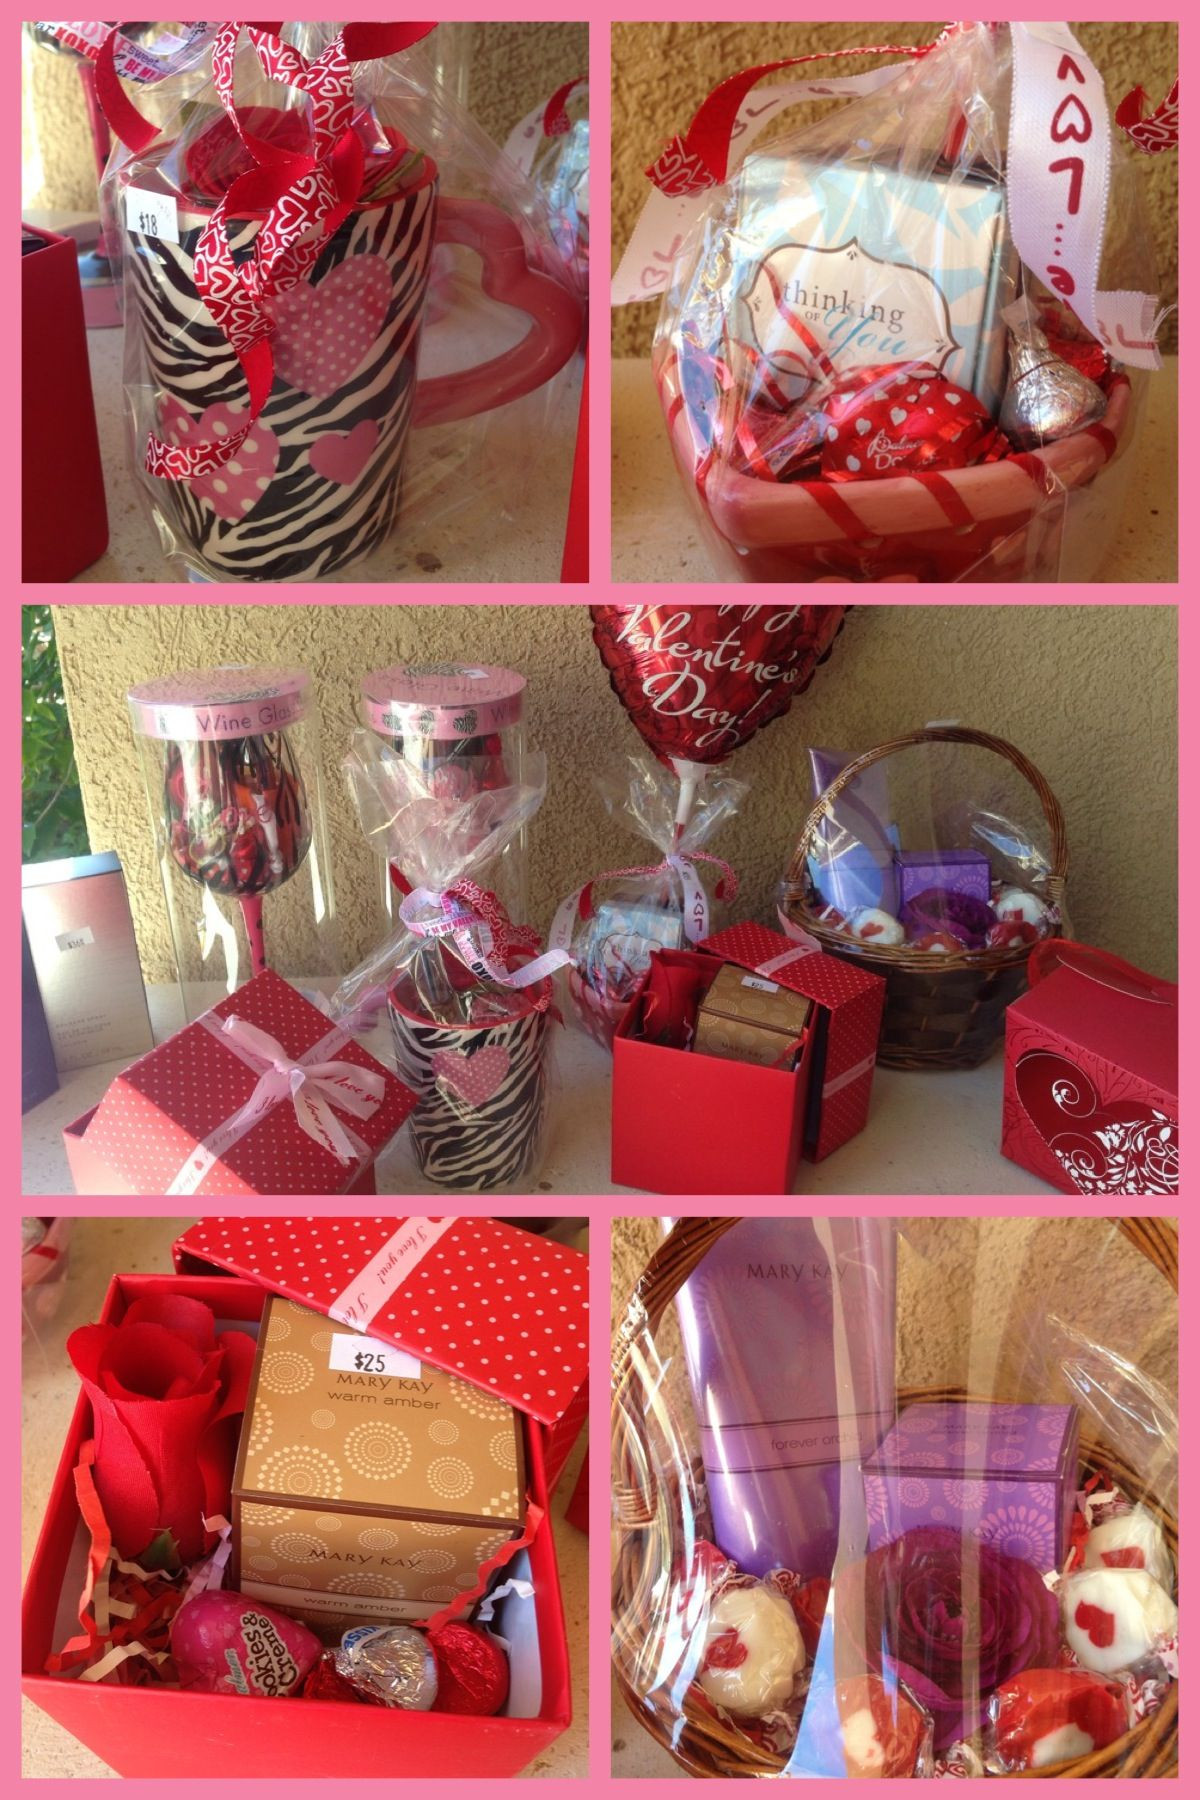 Mary Kay Gift Basket Ideas
 Mary Kay Valentine s Day Baskets •Starting as low as $10